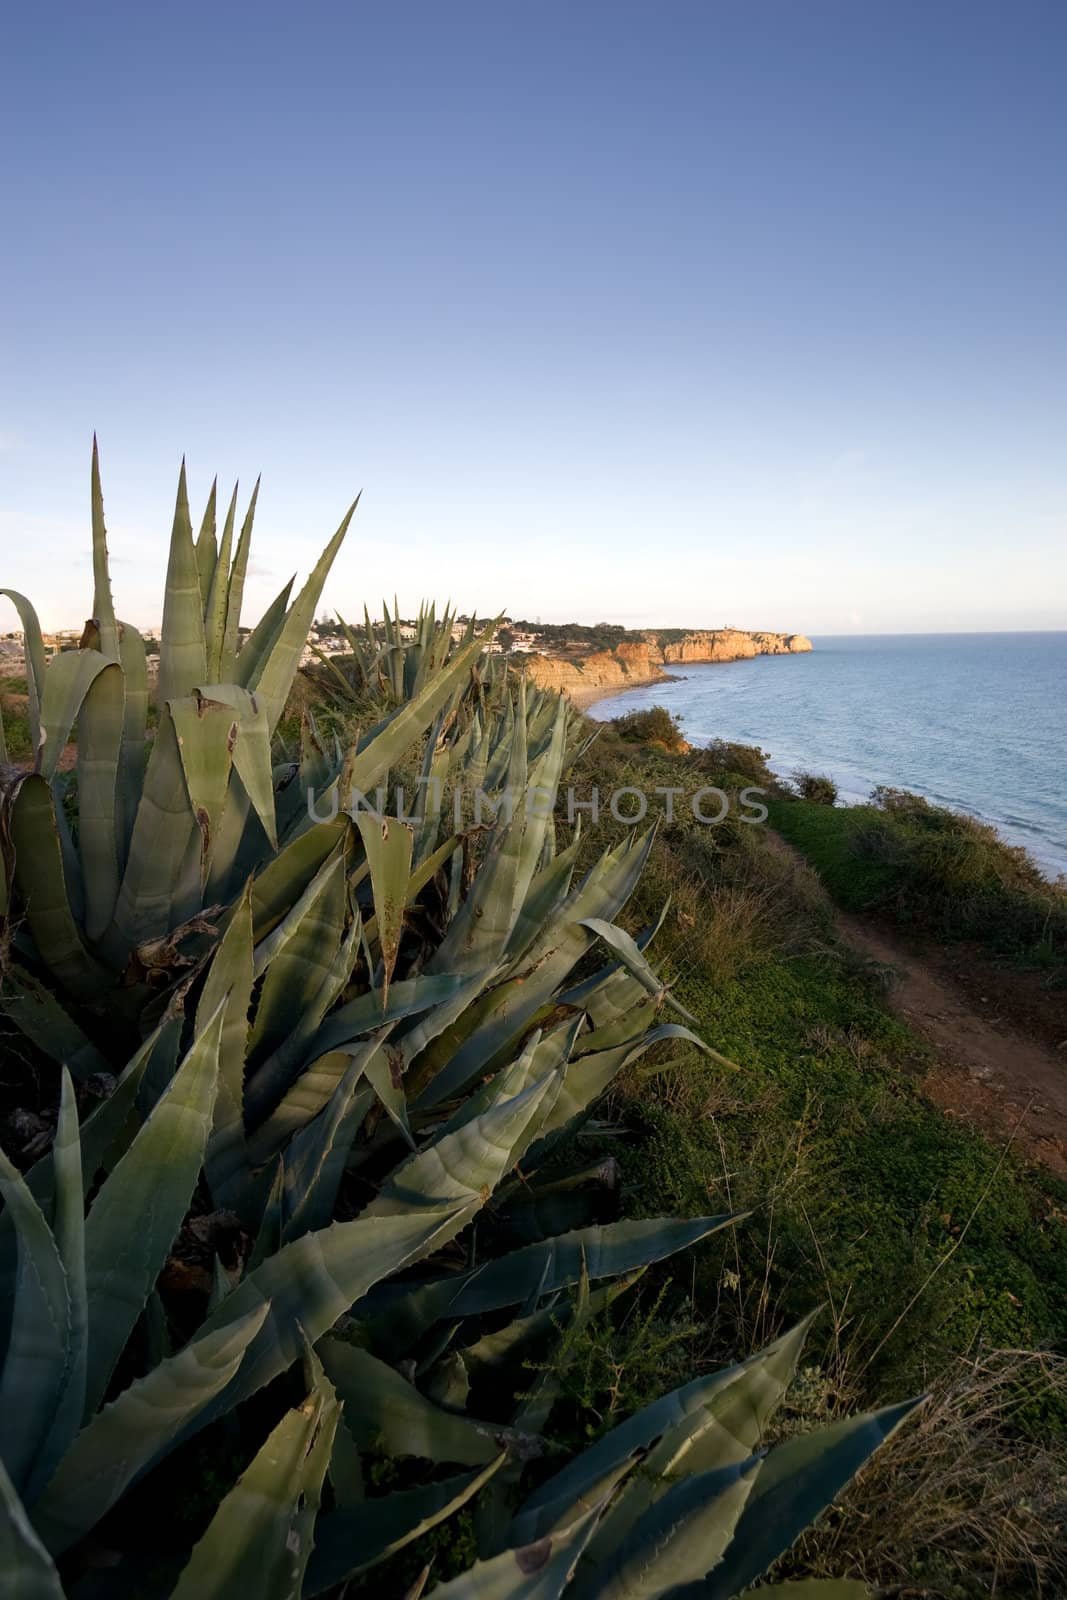 Wild Prickly Aloe plants in the foreground, looking back towards the coast of Lagos, in the Algarve, Portugal.